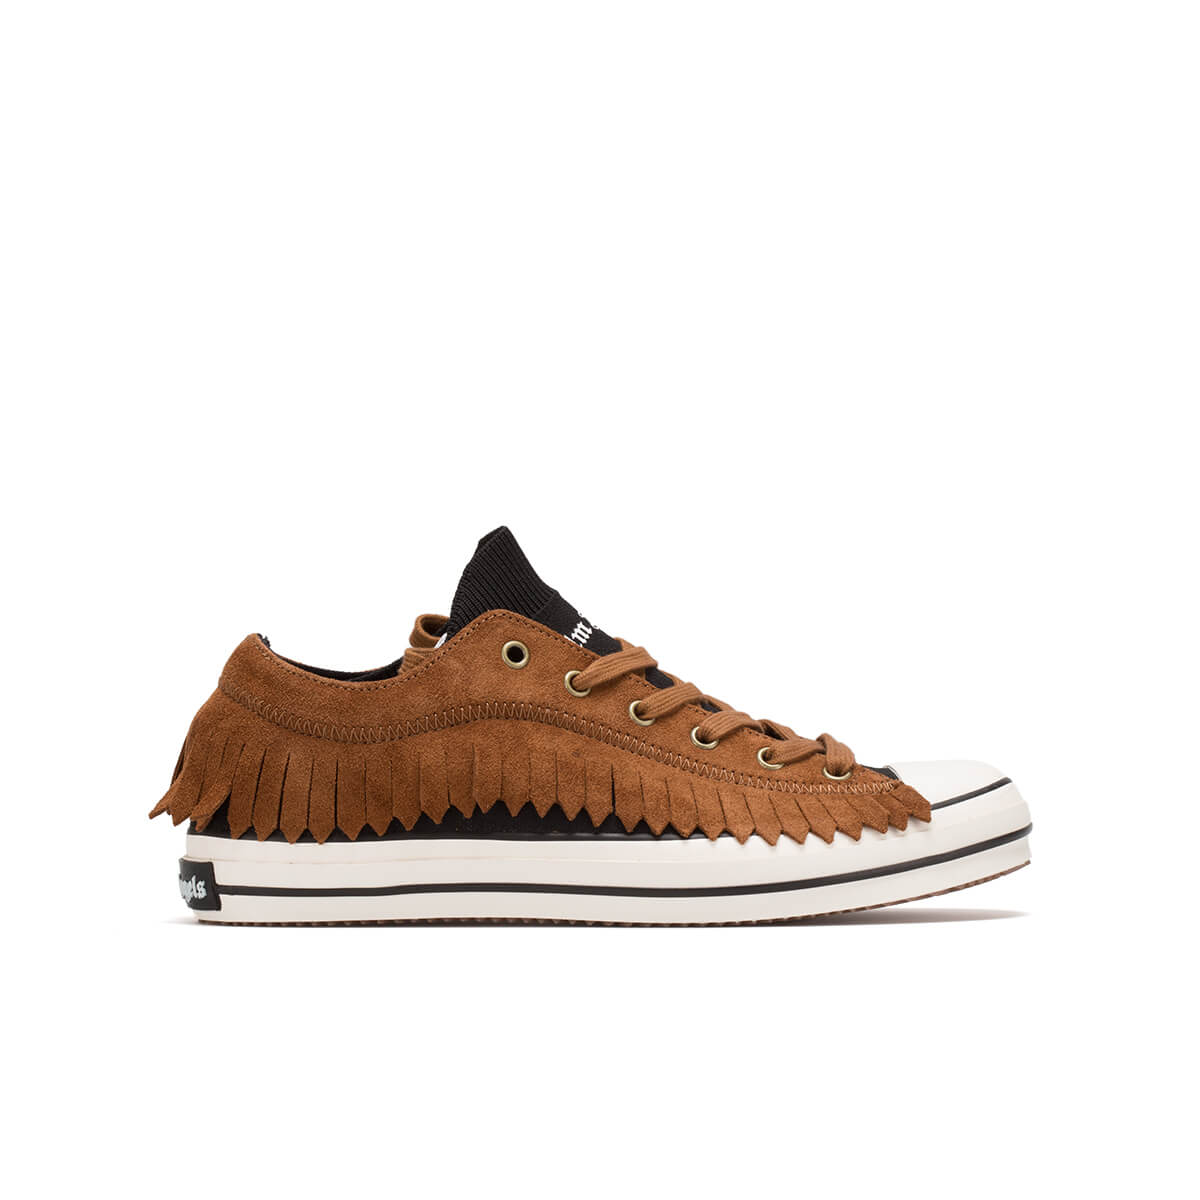 PALM ANGELS FRINGE LOW VULCANIZED SNEAKERS,PMIA060S21LEA0016010 Brown